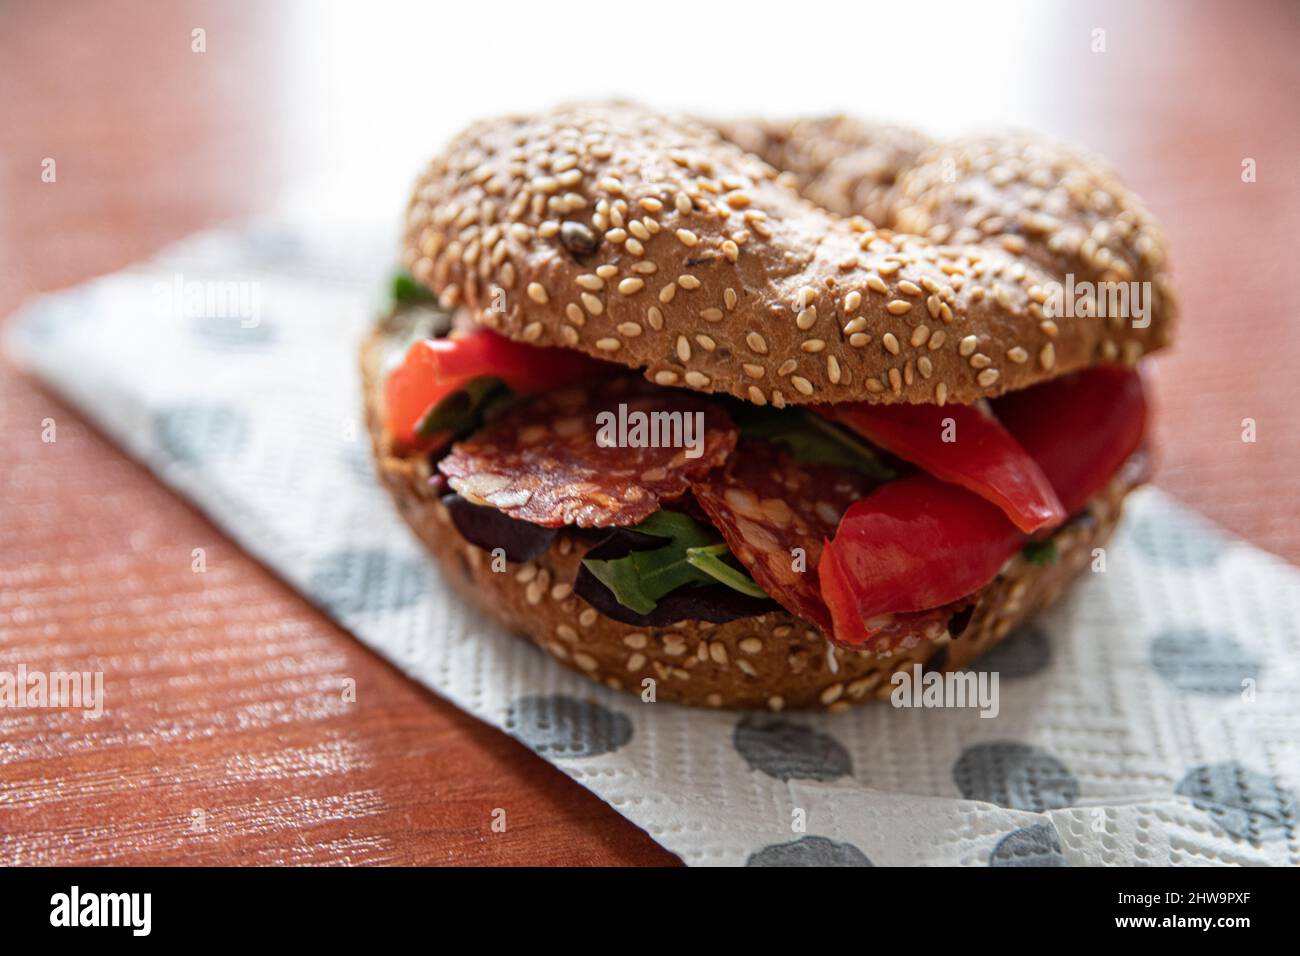 Delicious lunch in work, tasty sandwich with salami Stock Photo